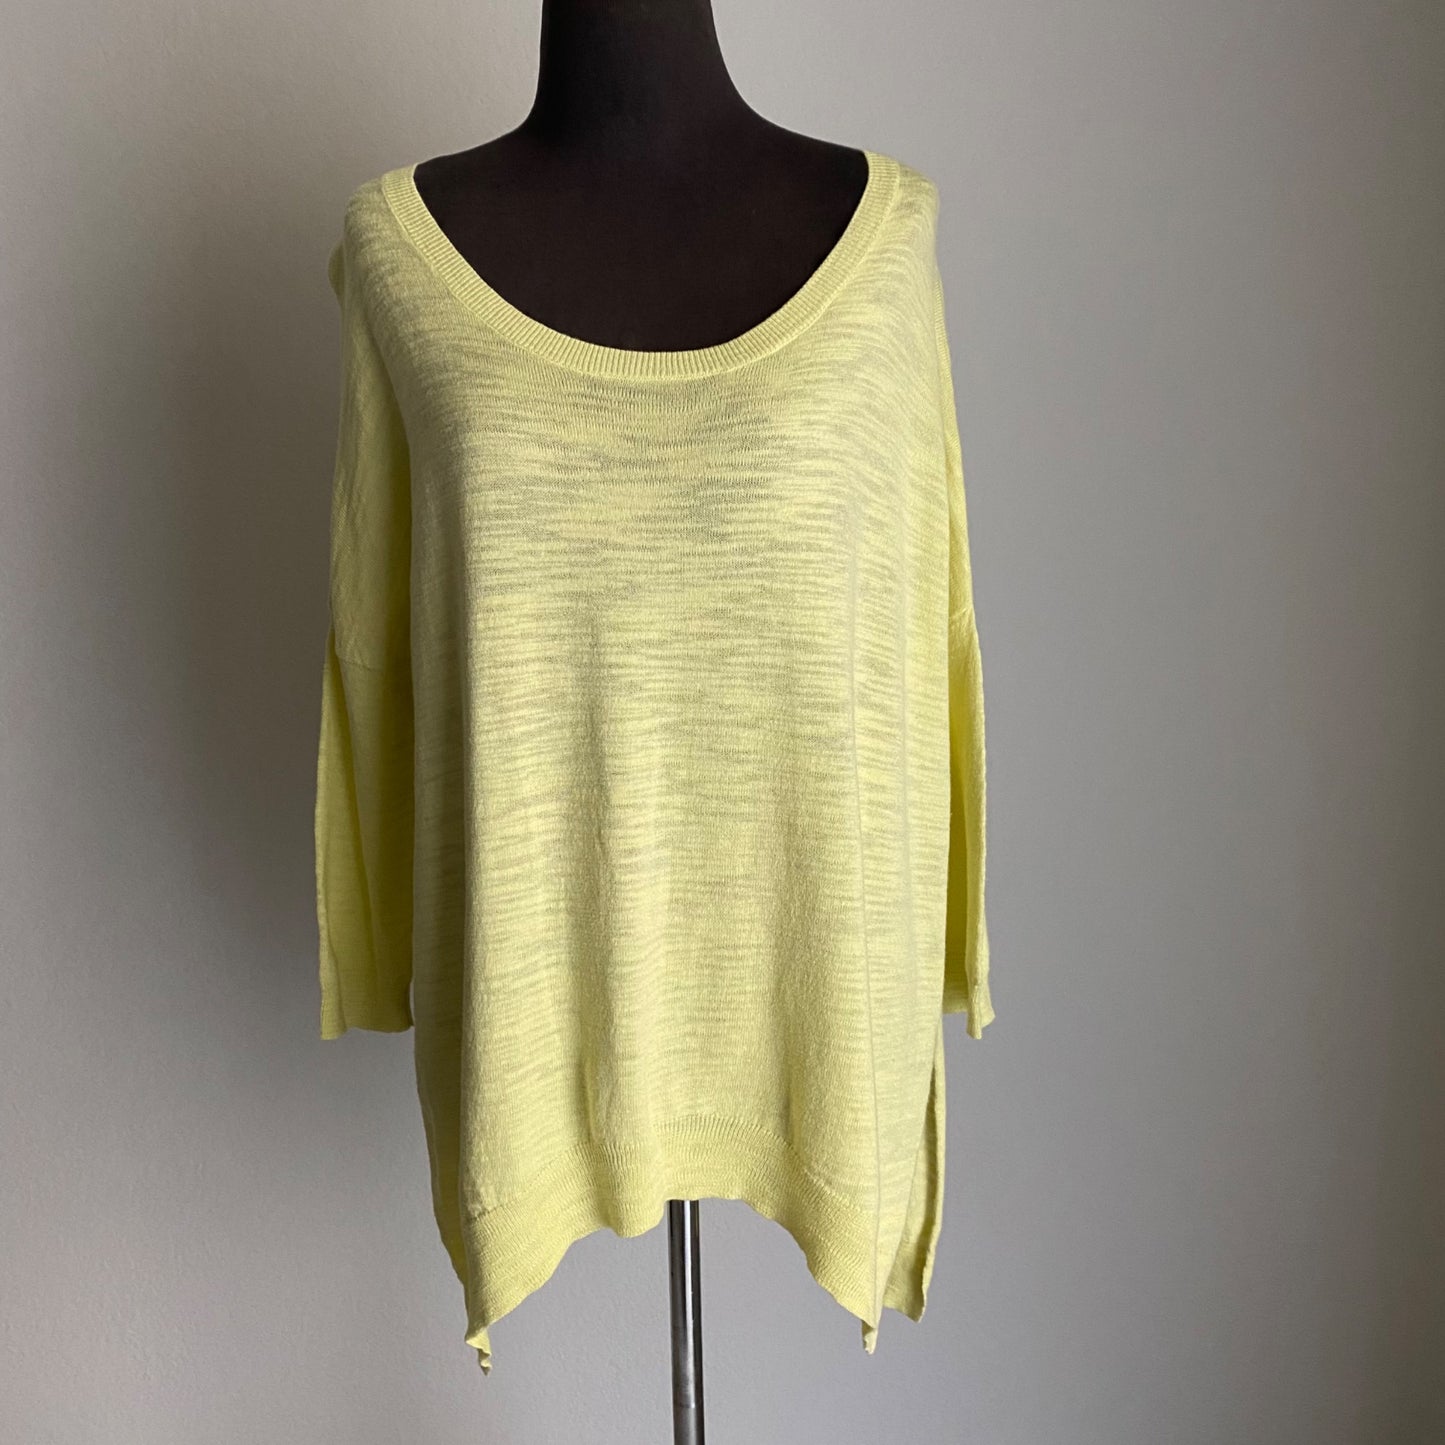 Anthropologie Moth sz XS cotton 3/4 length sleeve scoop neck knit sweater